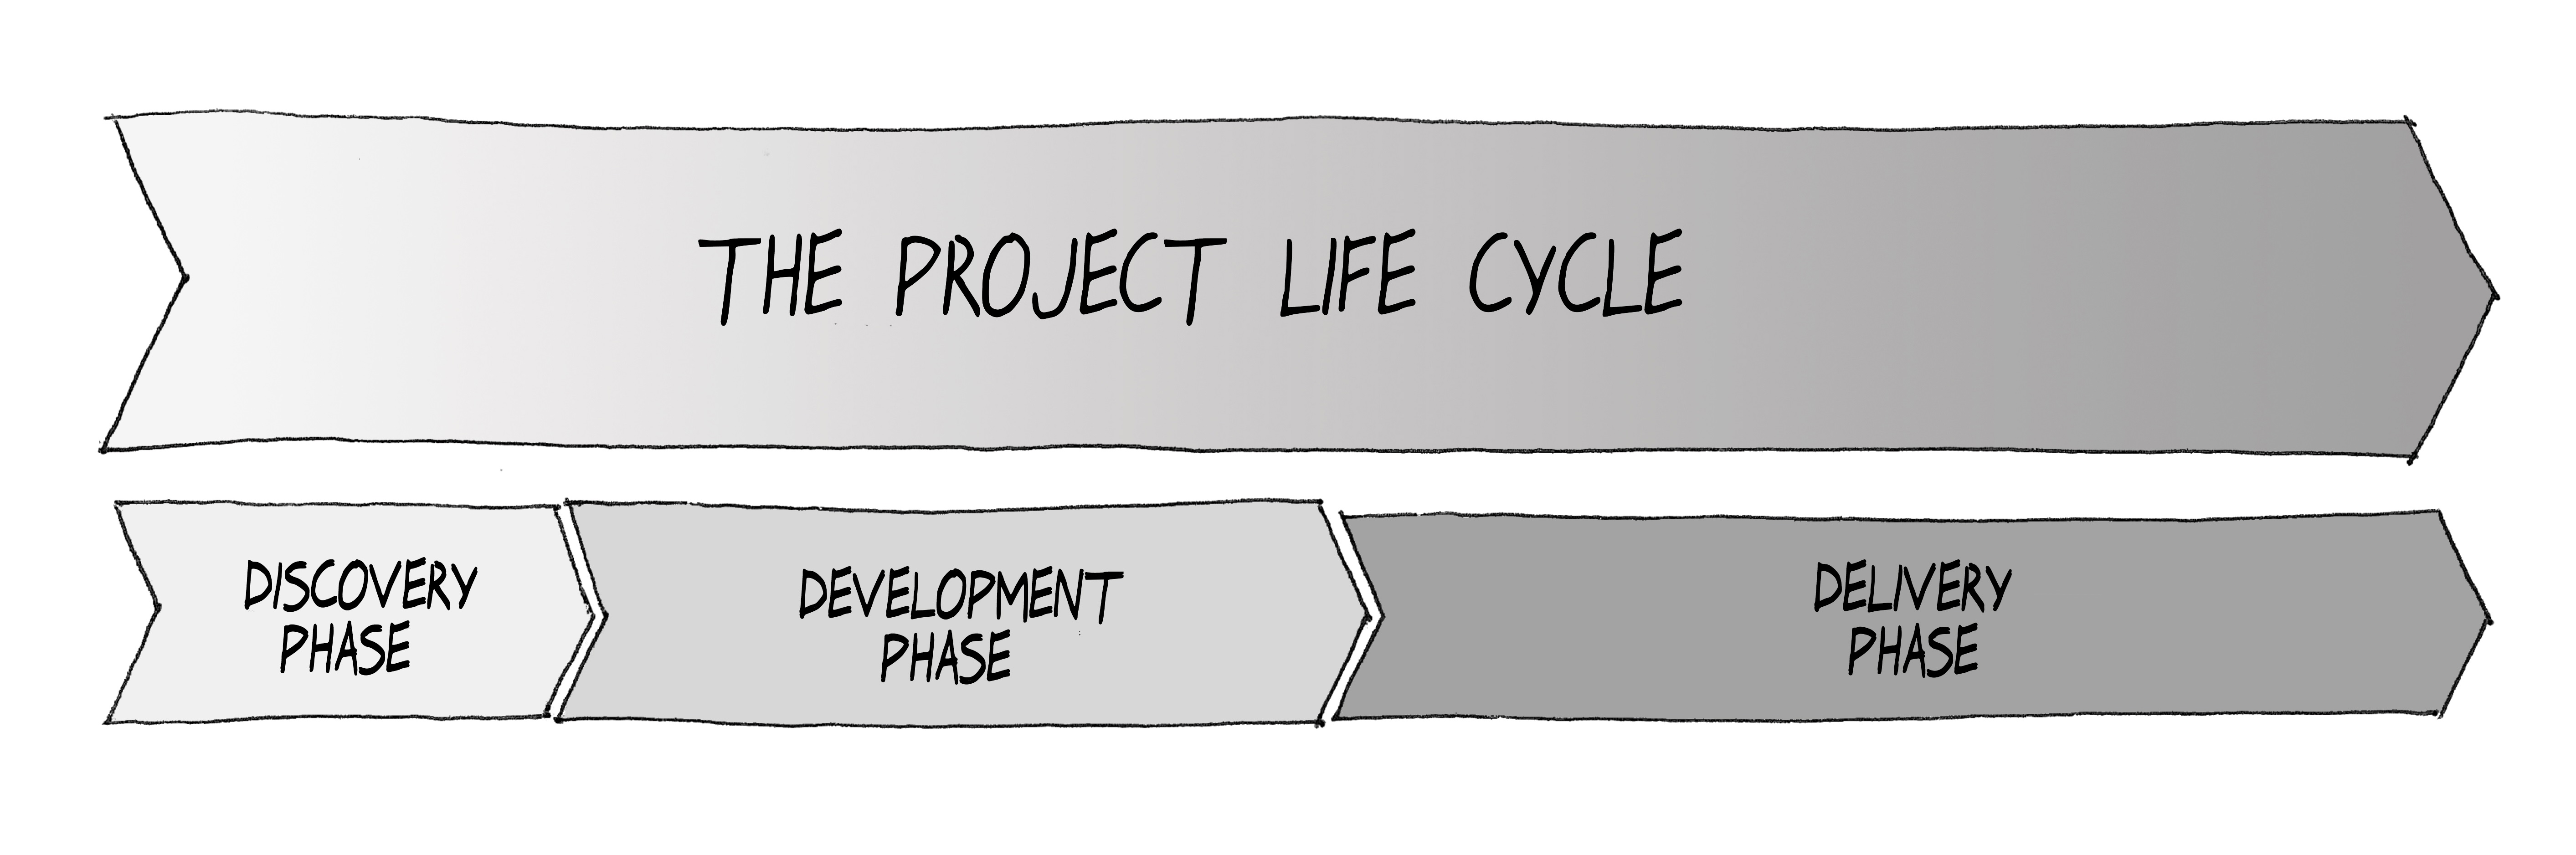 CAMMP™ project life cycle, project management methodology